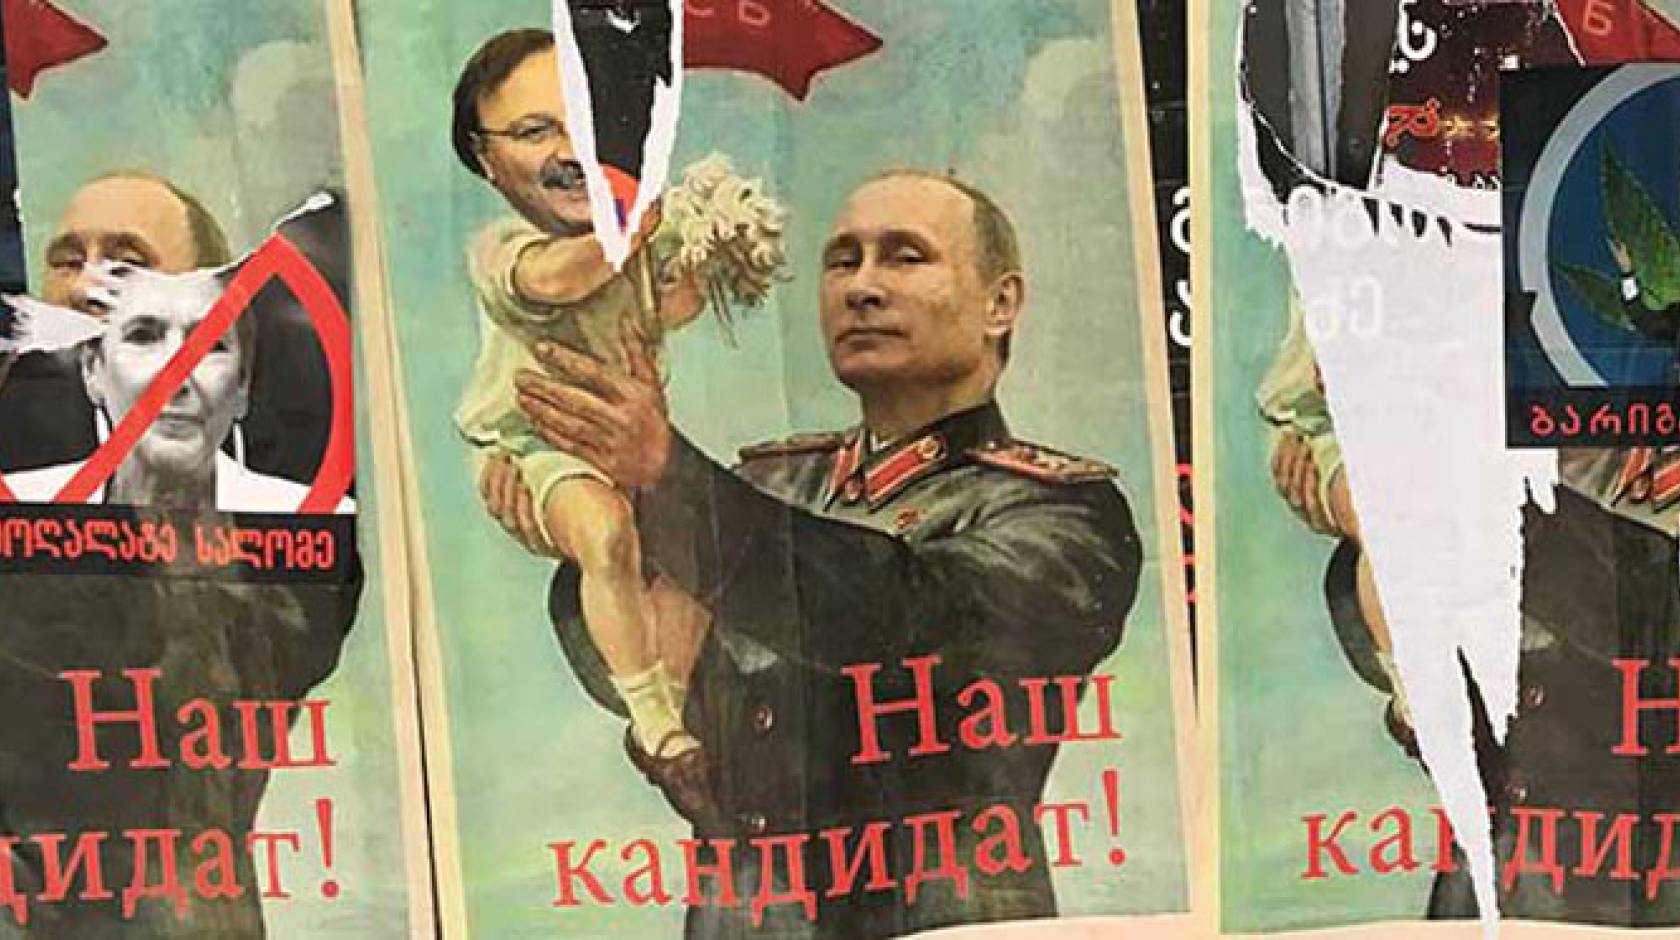 Election posters featuring Putin